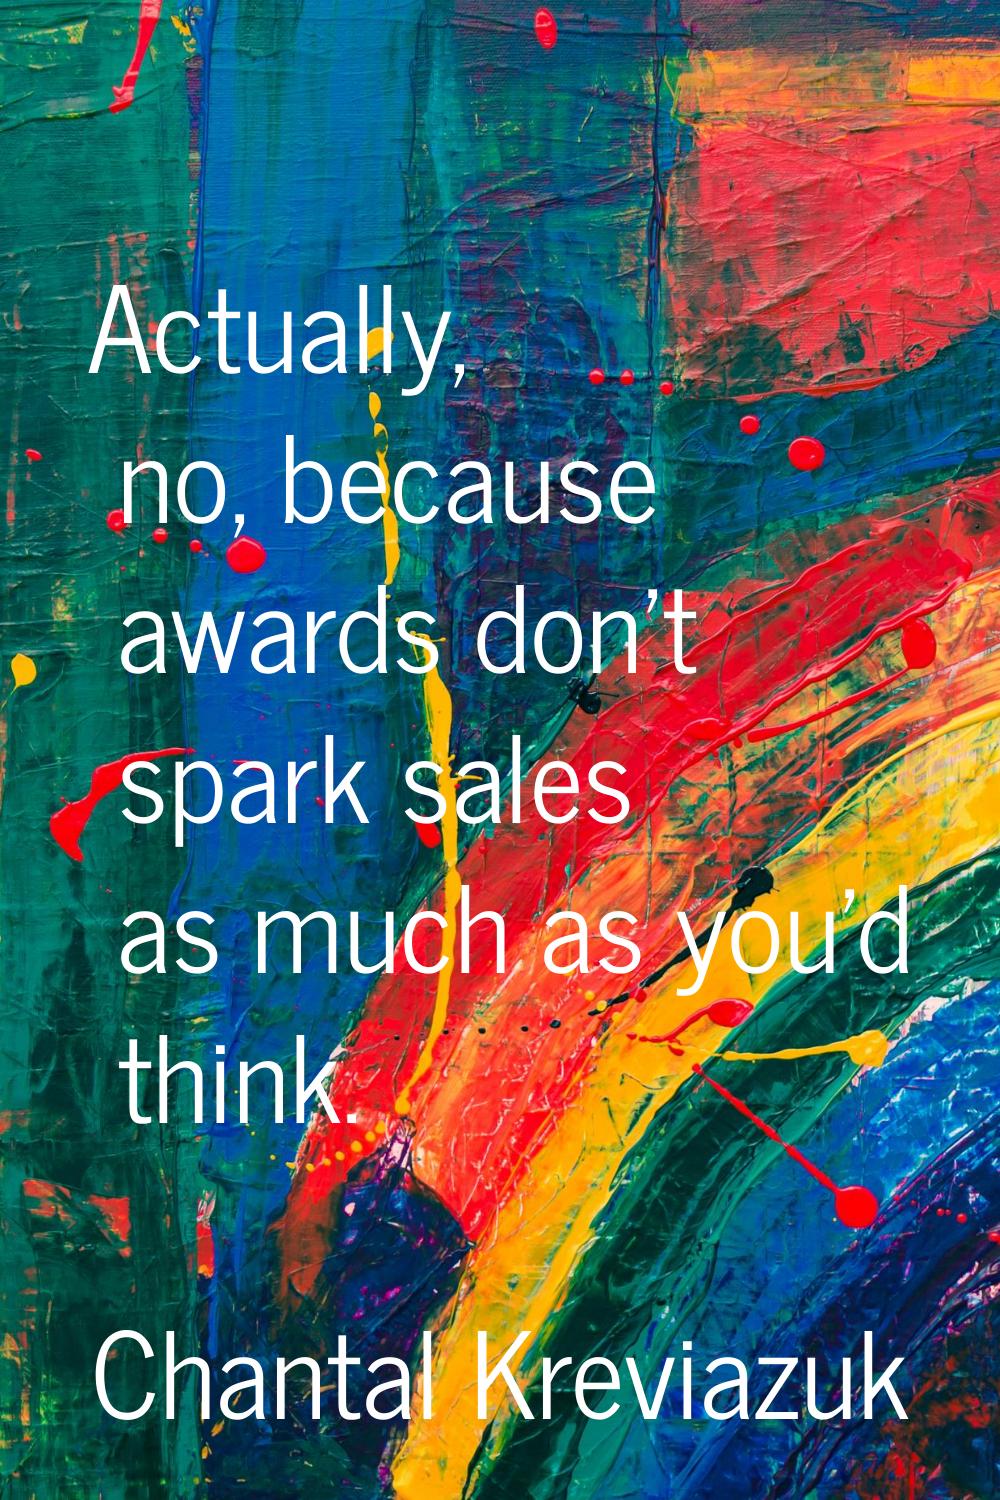 Actually, no, because awards don't spark sales as much as you'd think.